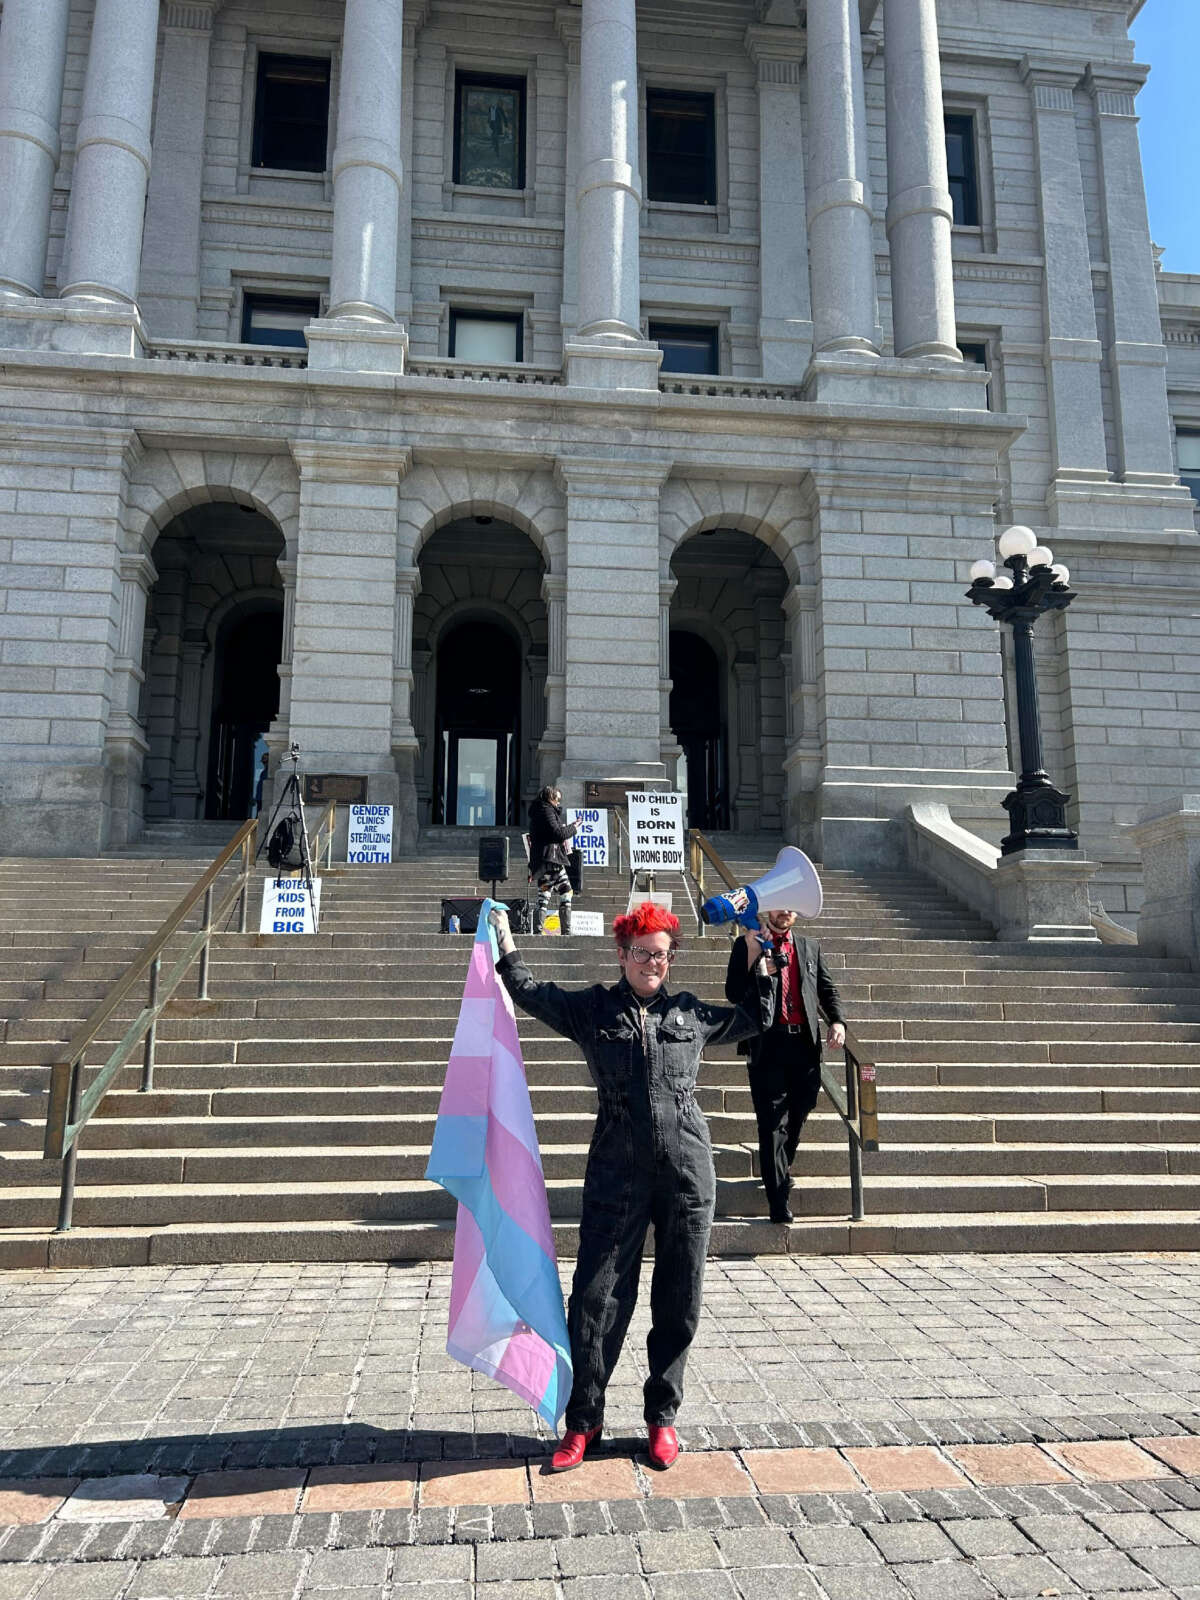 A pro-trans activist stands in front of an anti-trans demonstration.